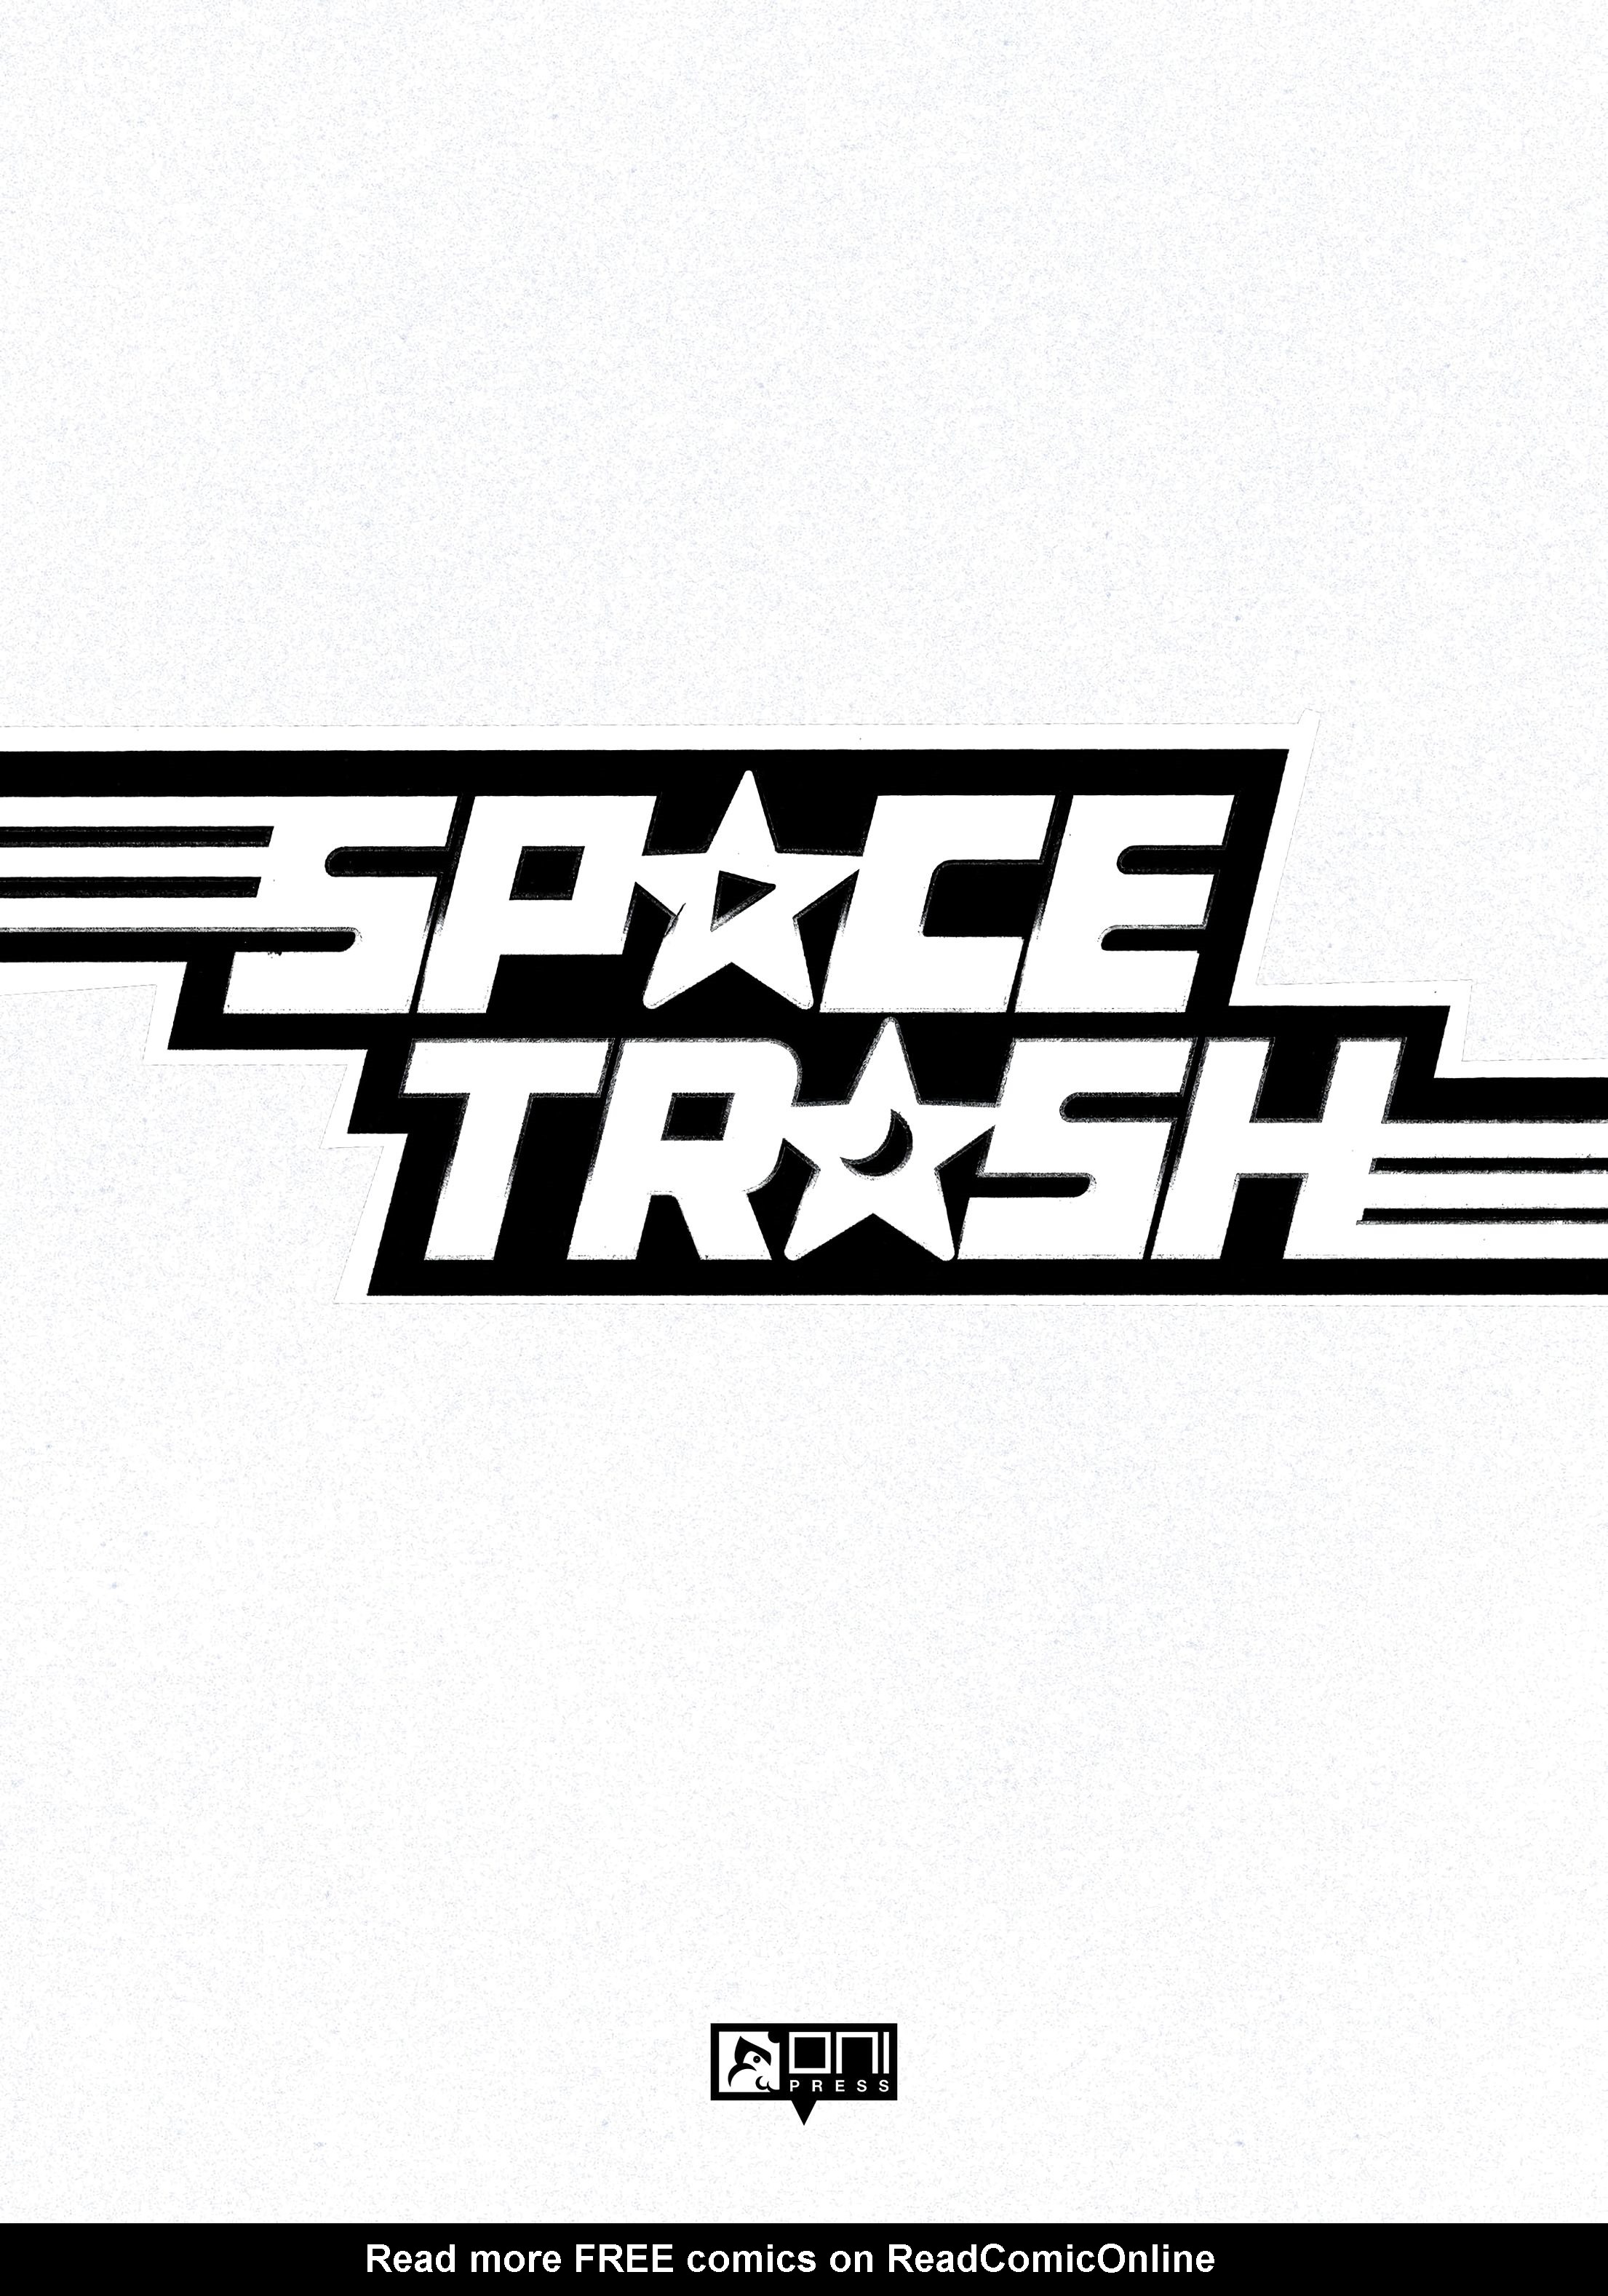 Read online Space Trash comic -  Issue # TPB - 2